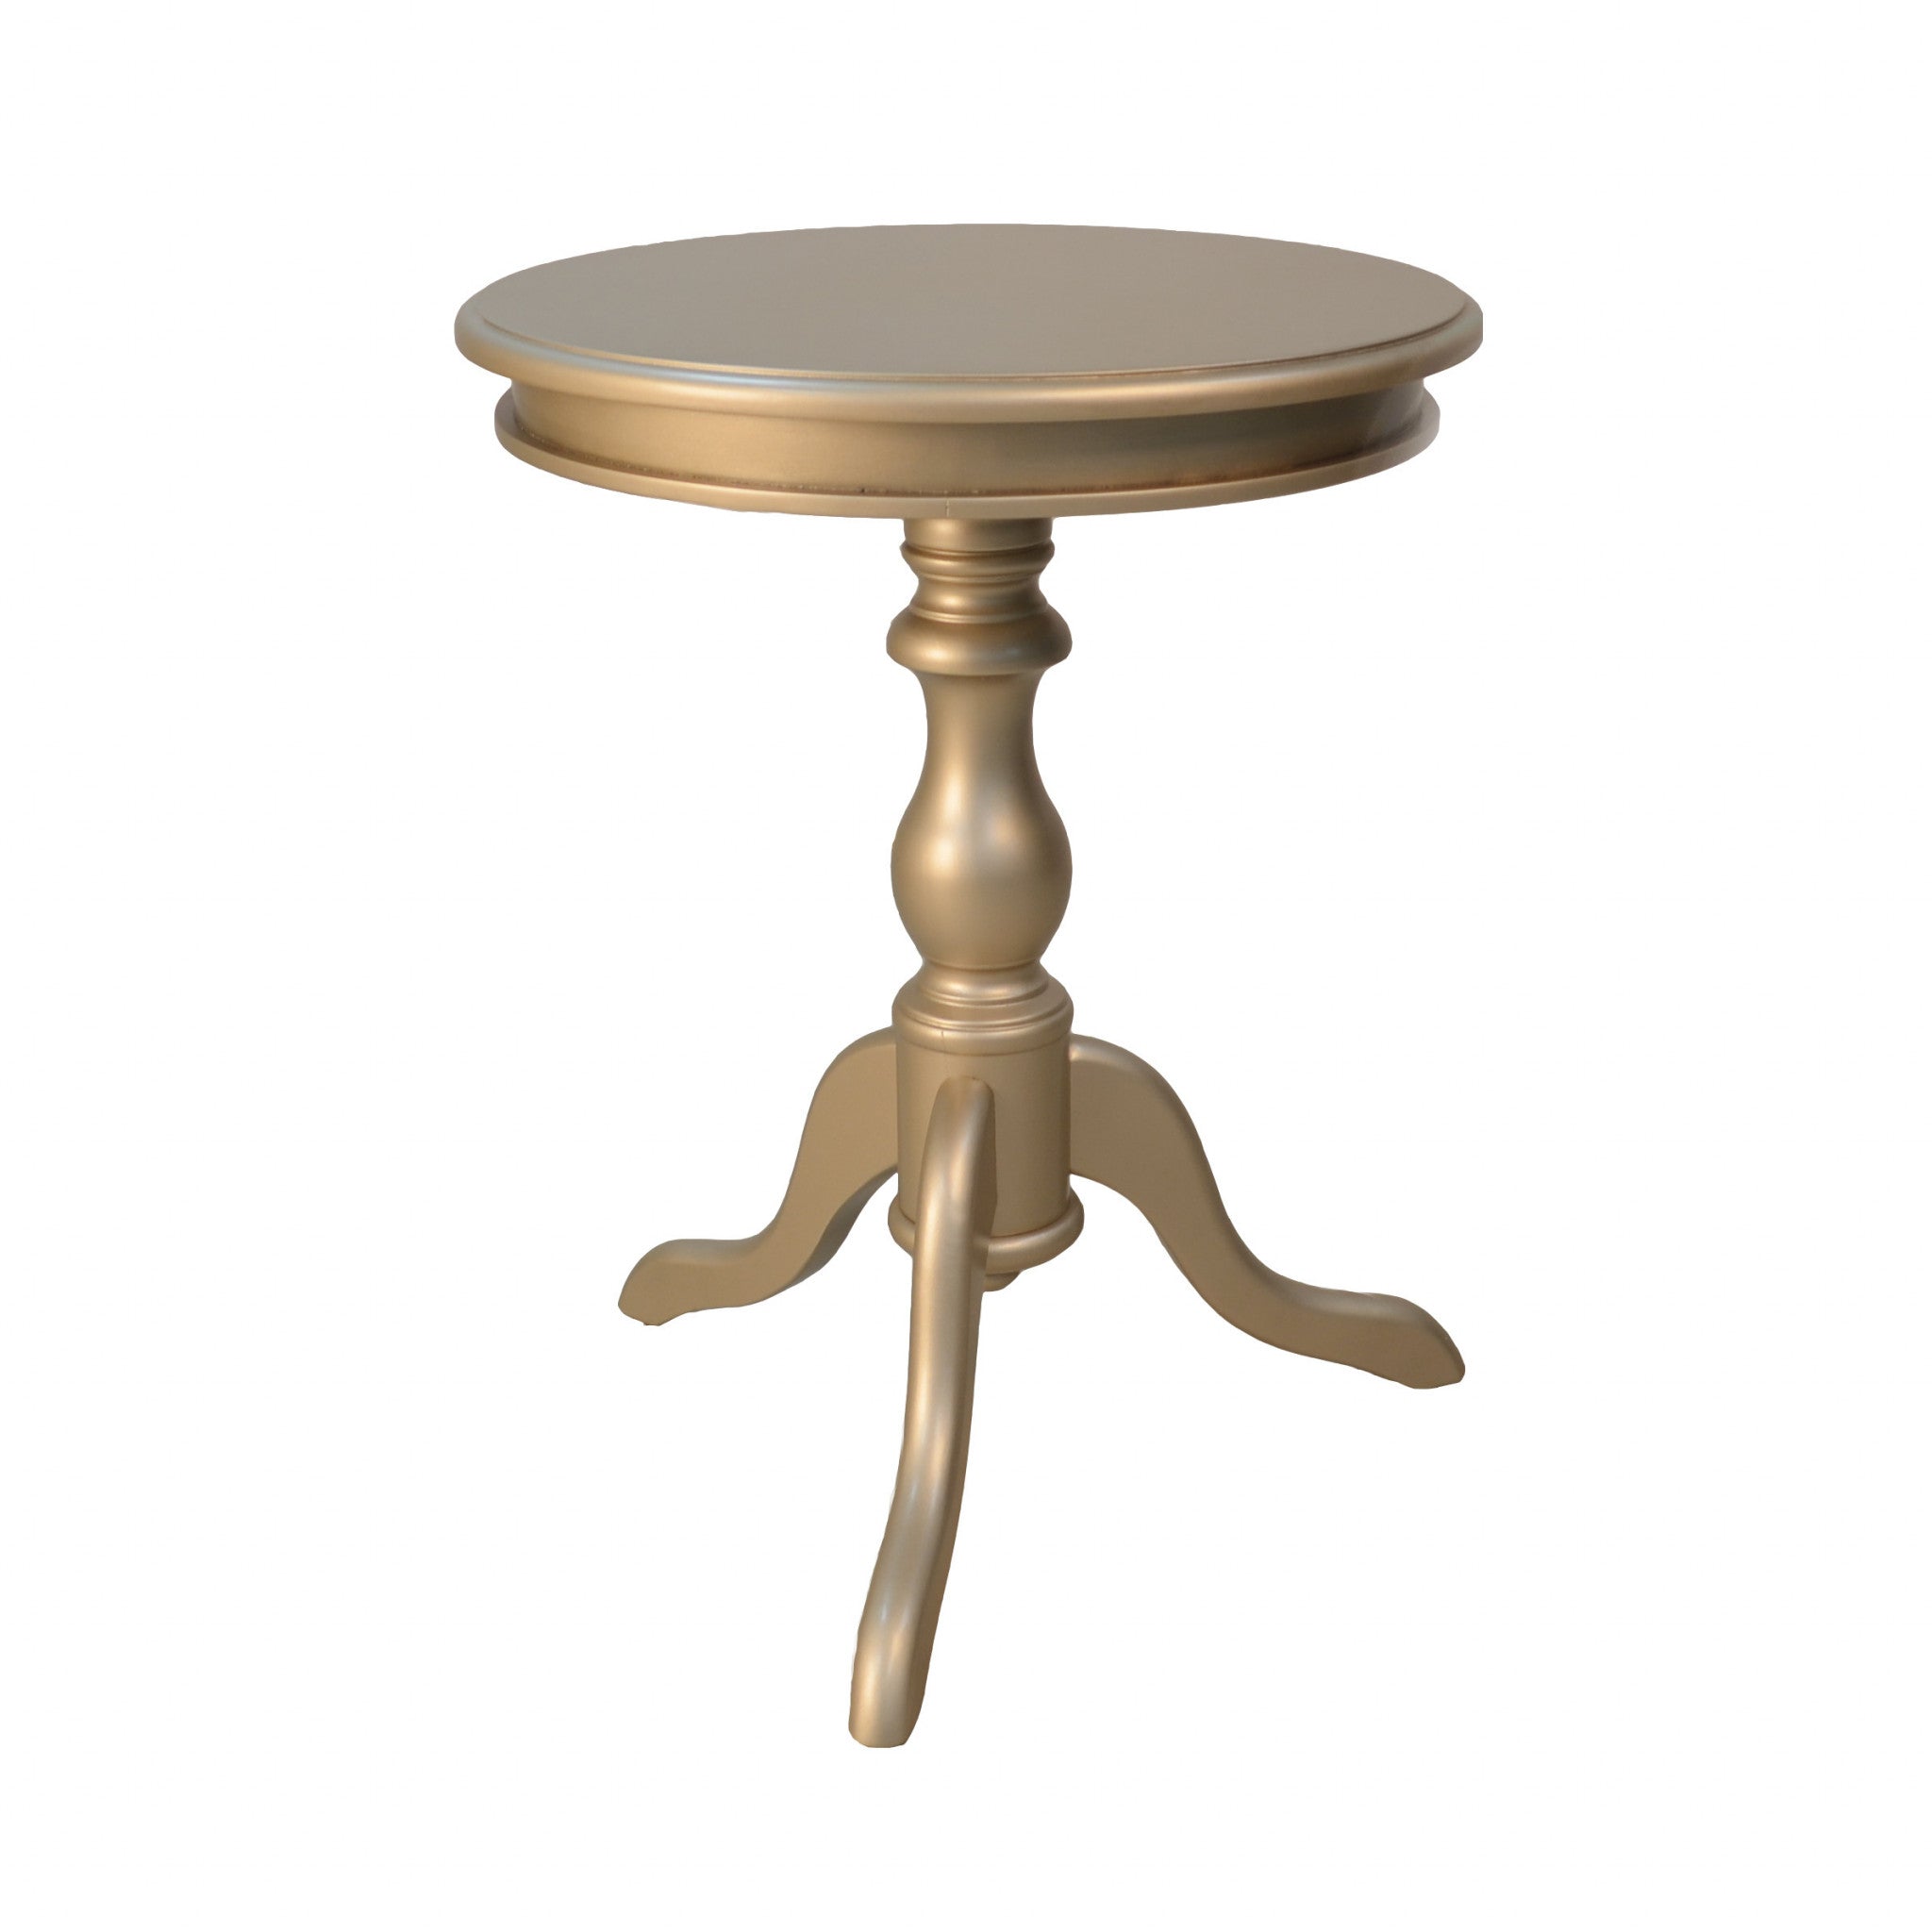 25" Champagne Manufactured Wood Round End Table